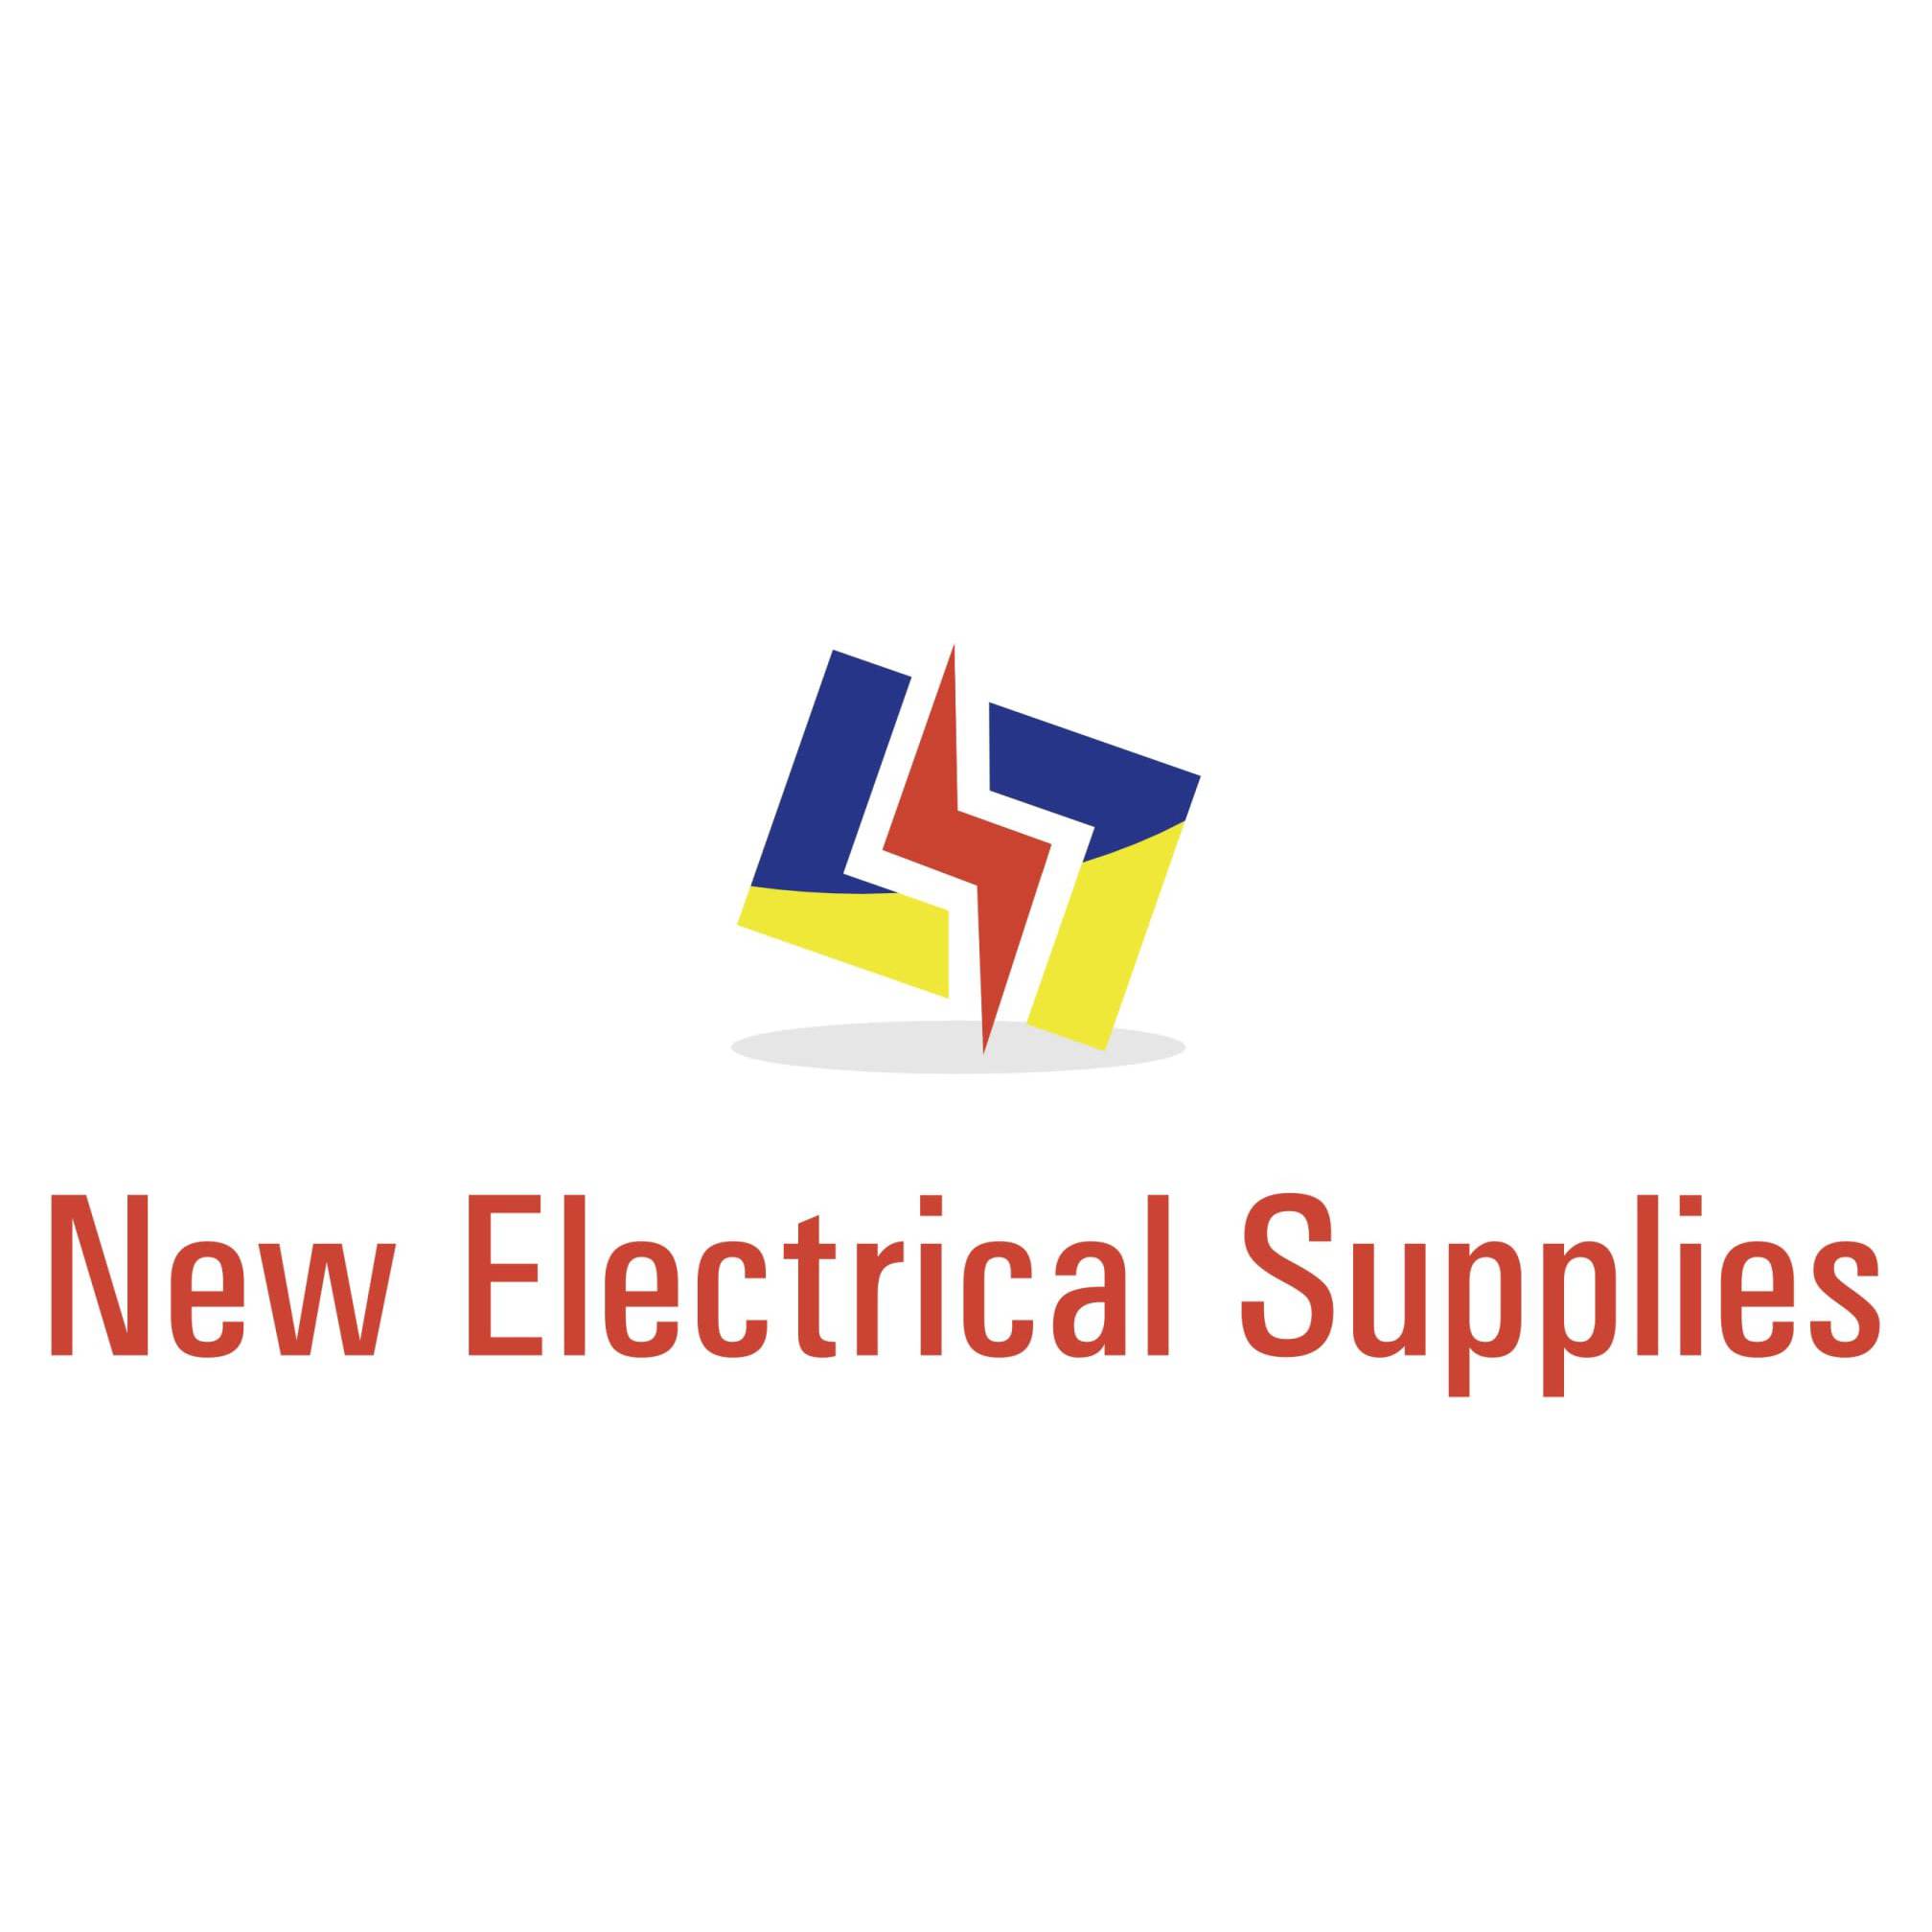 New Electrical Supplies Logo